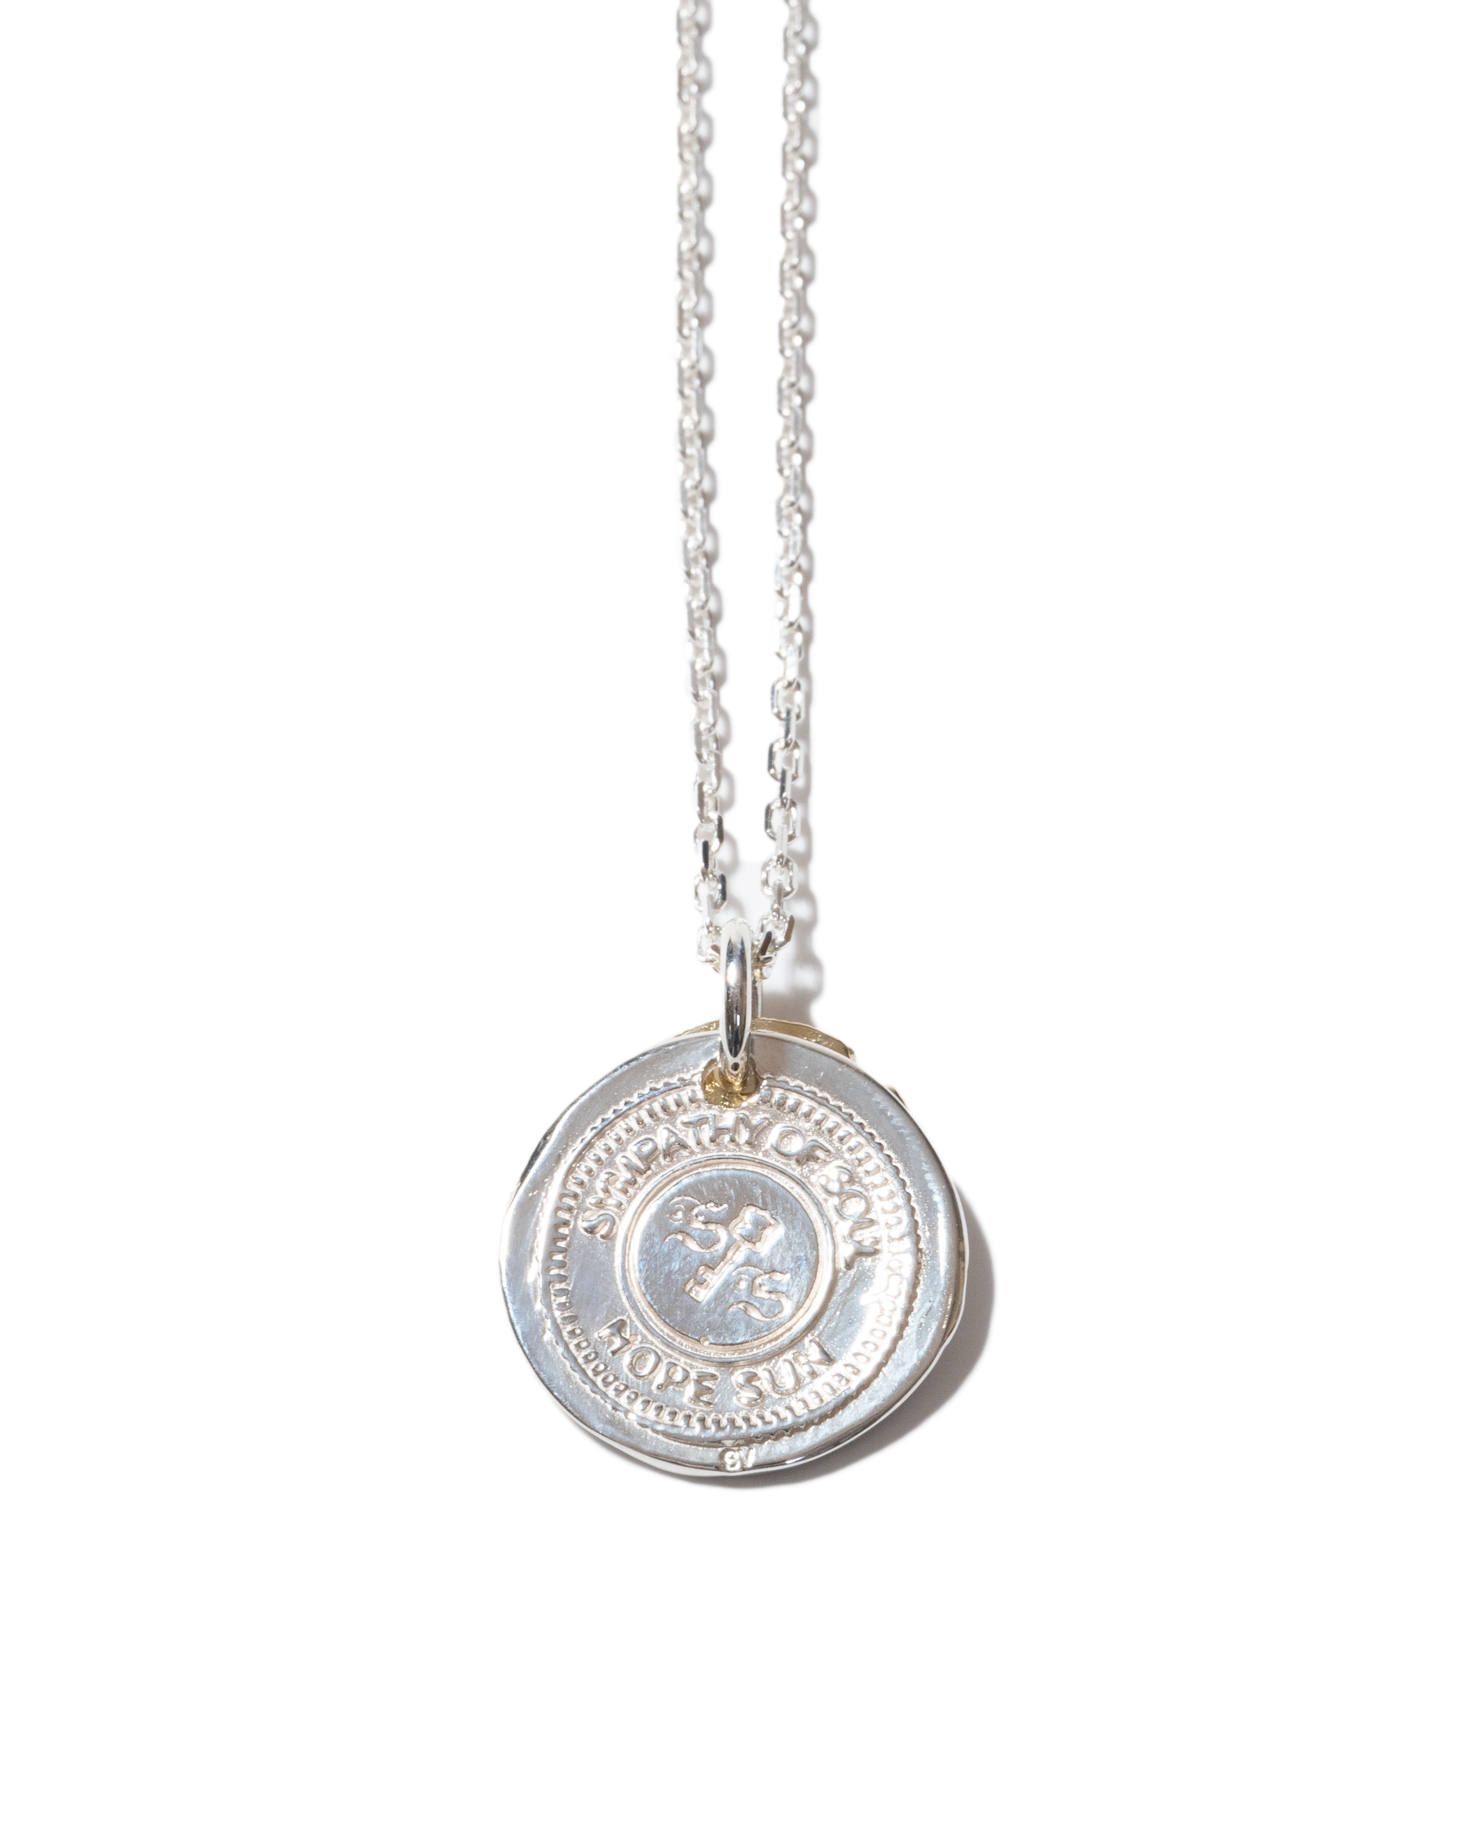 Sympathy of Soul - B.C. Coin Necklace / Good Luck - Silver ...